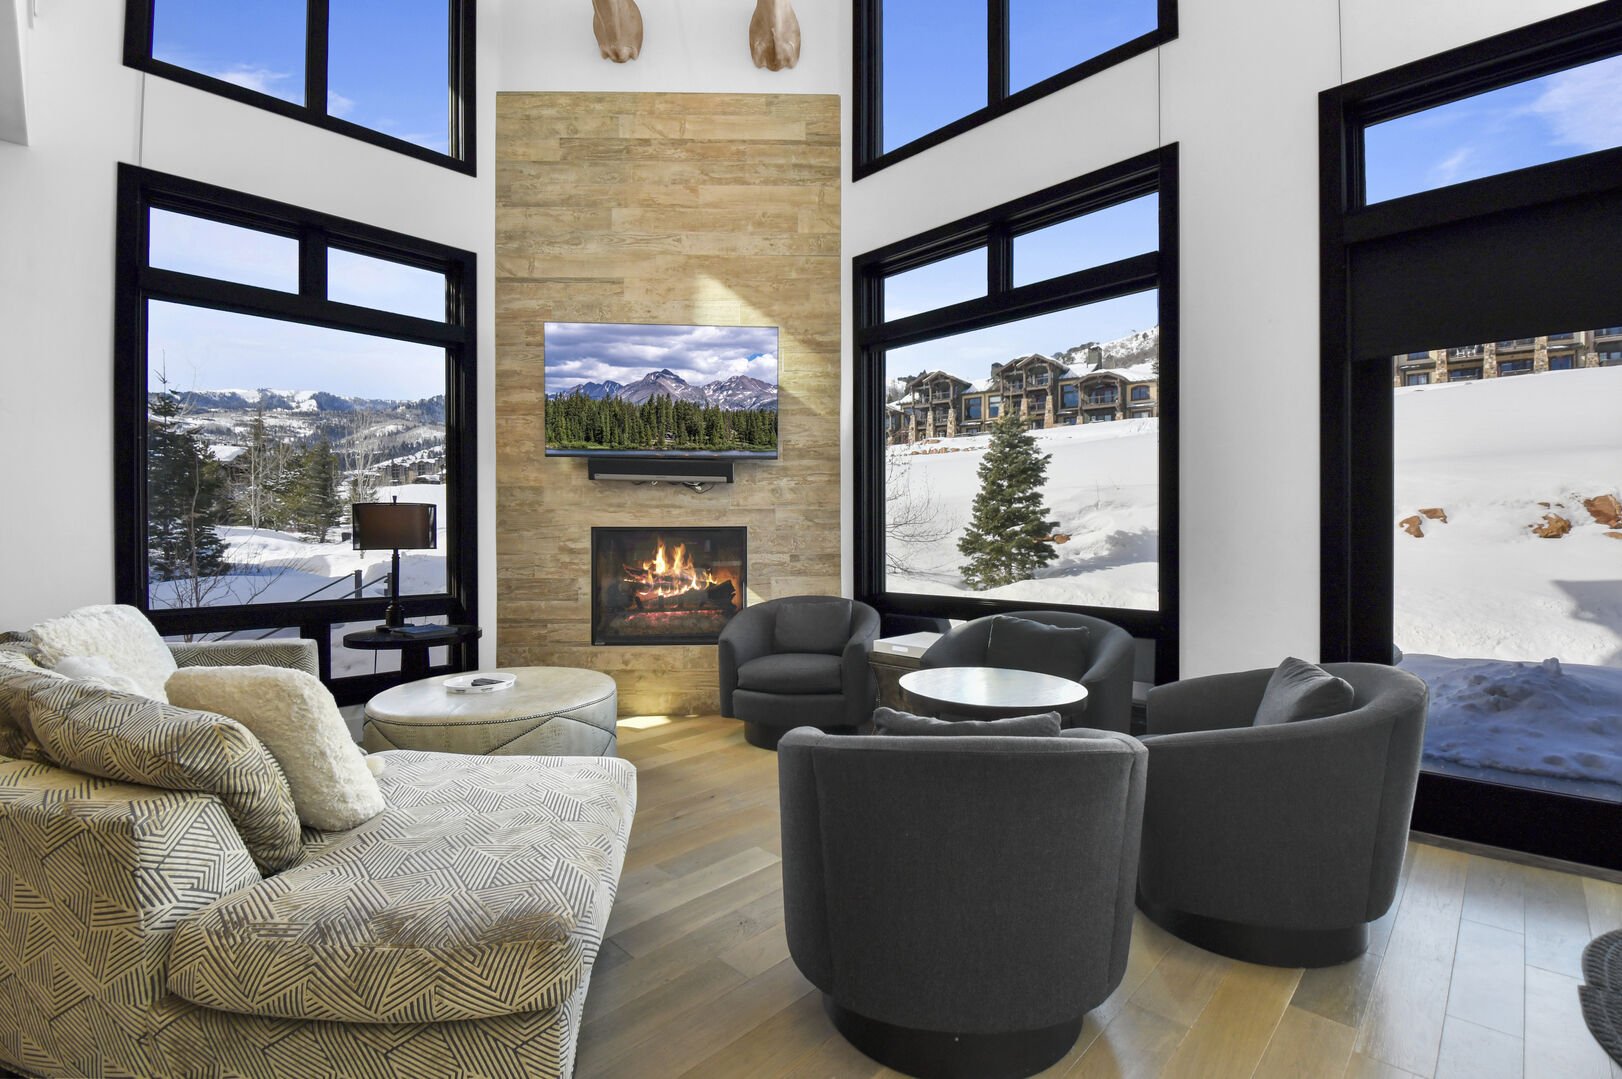 Relax in luxury with golf course and mountain views beyond.